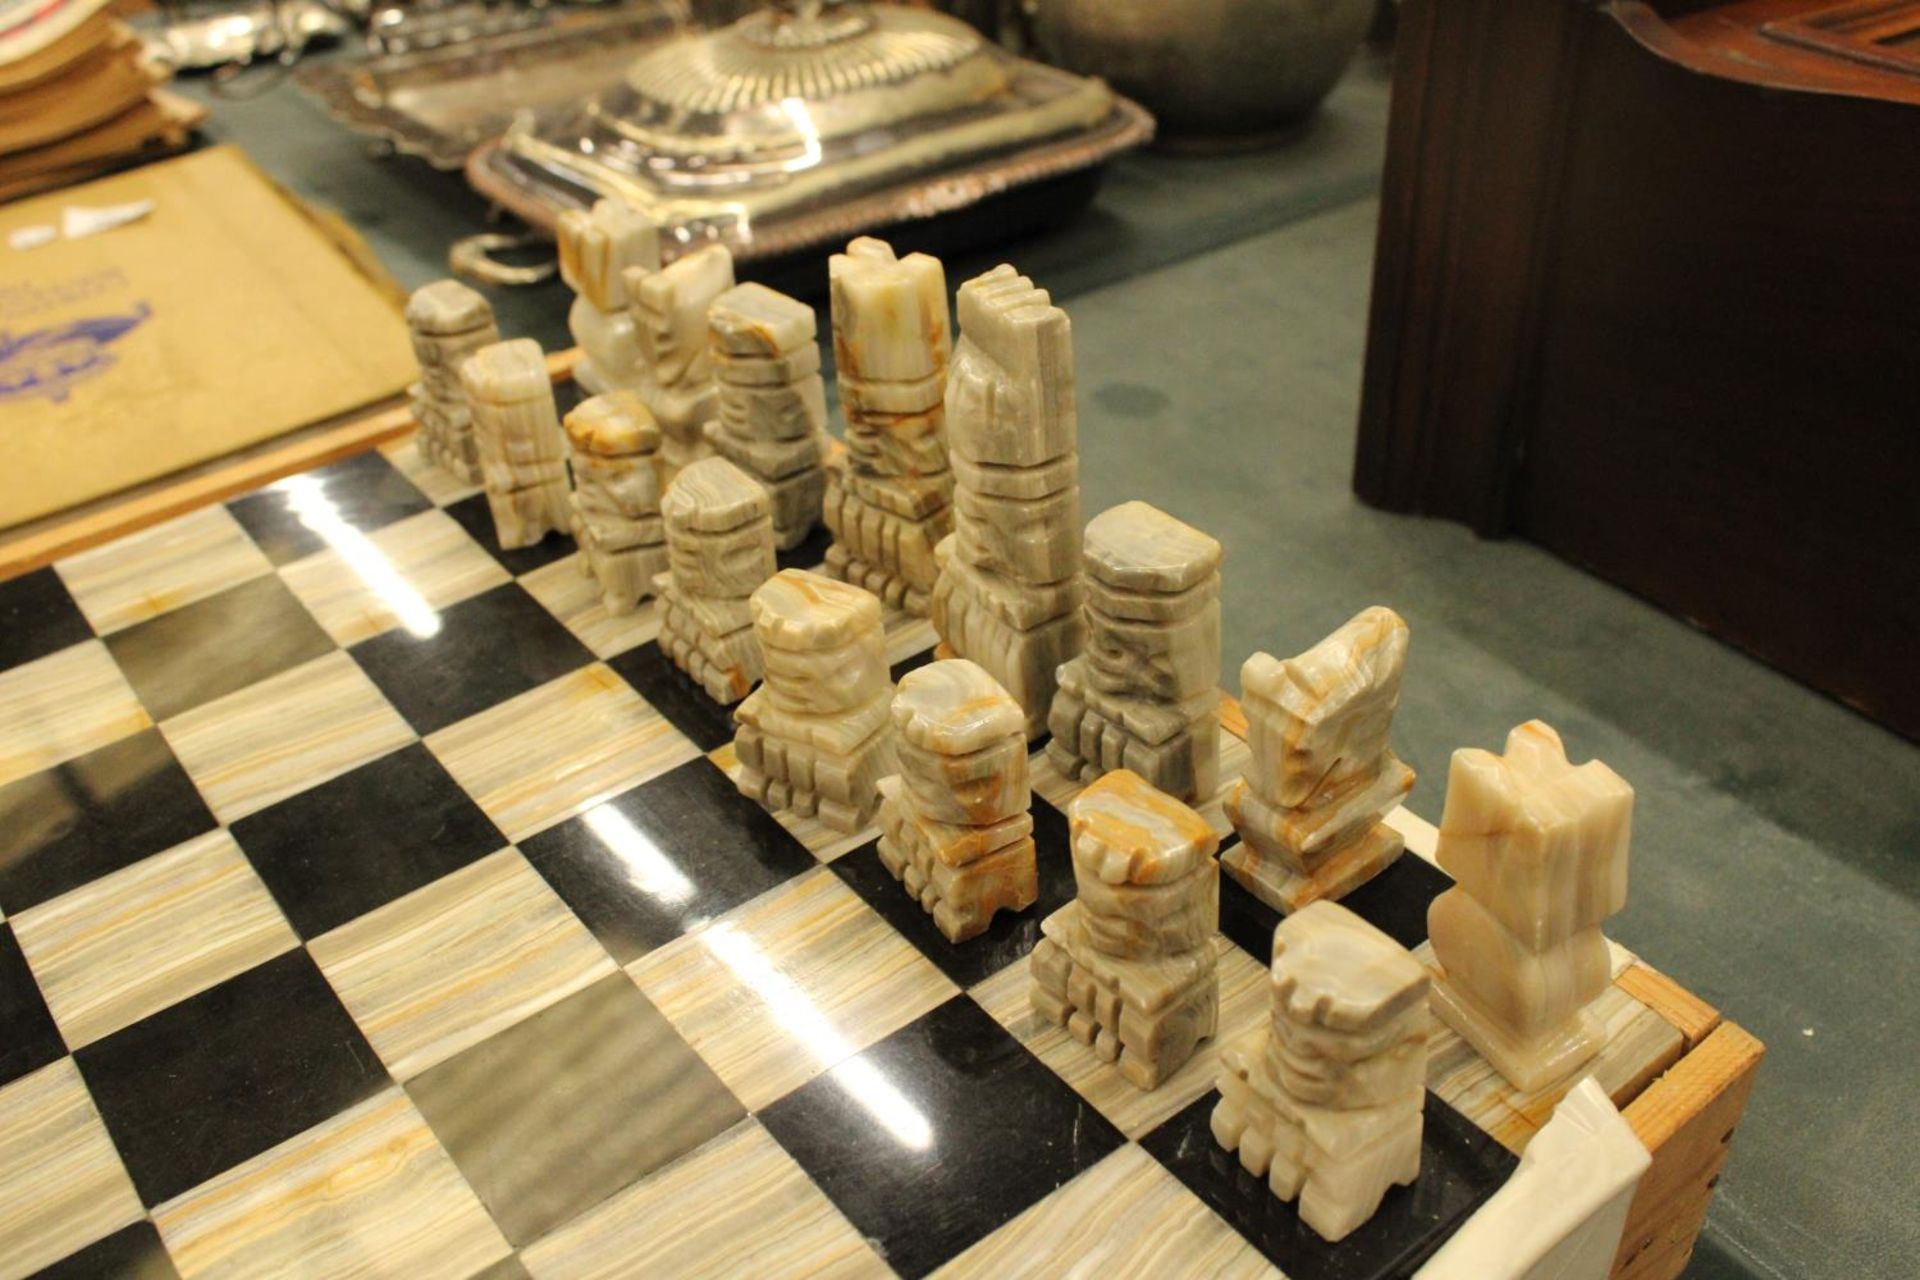 A COMPLETE MARBLE AND STONE CHESS SET WITH CARVED PIECES - Image 2 of 5